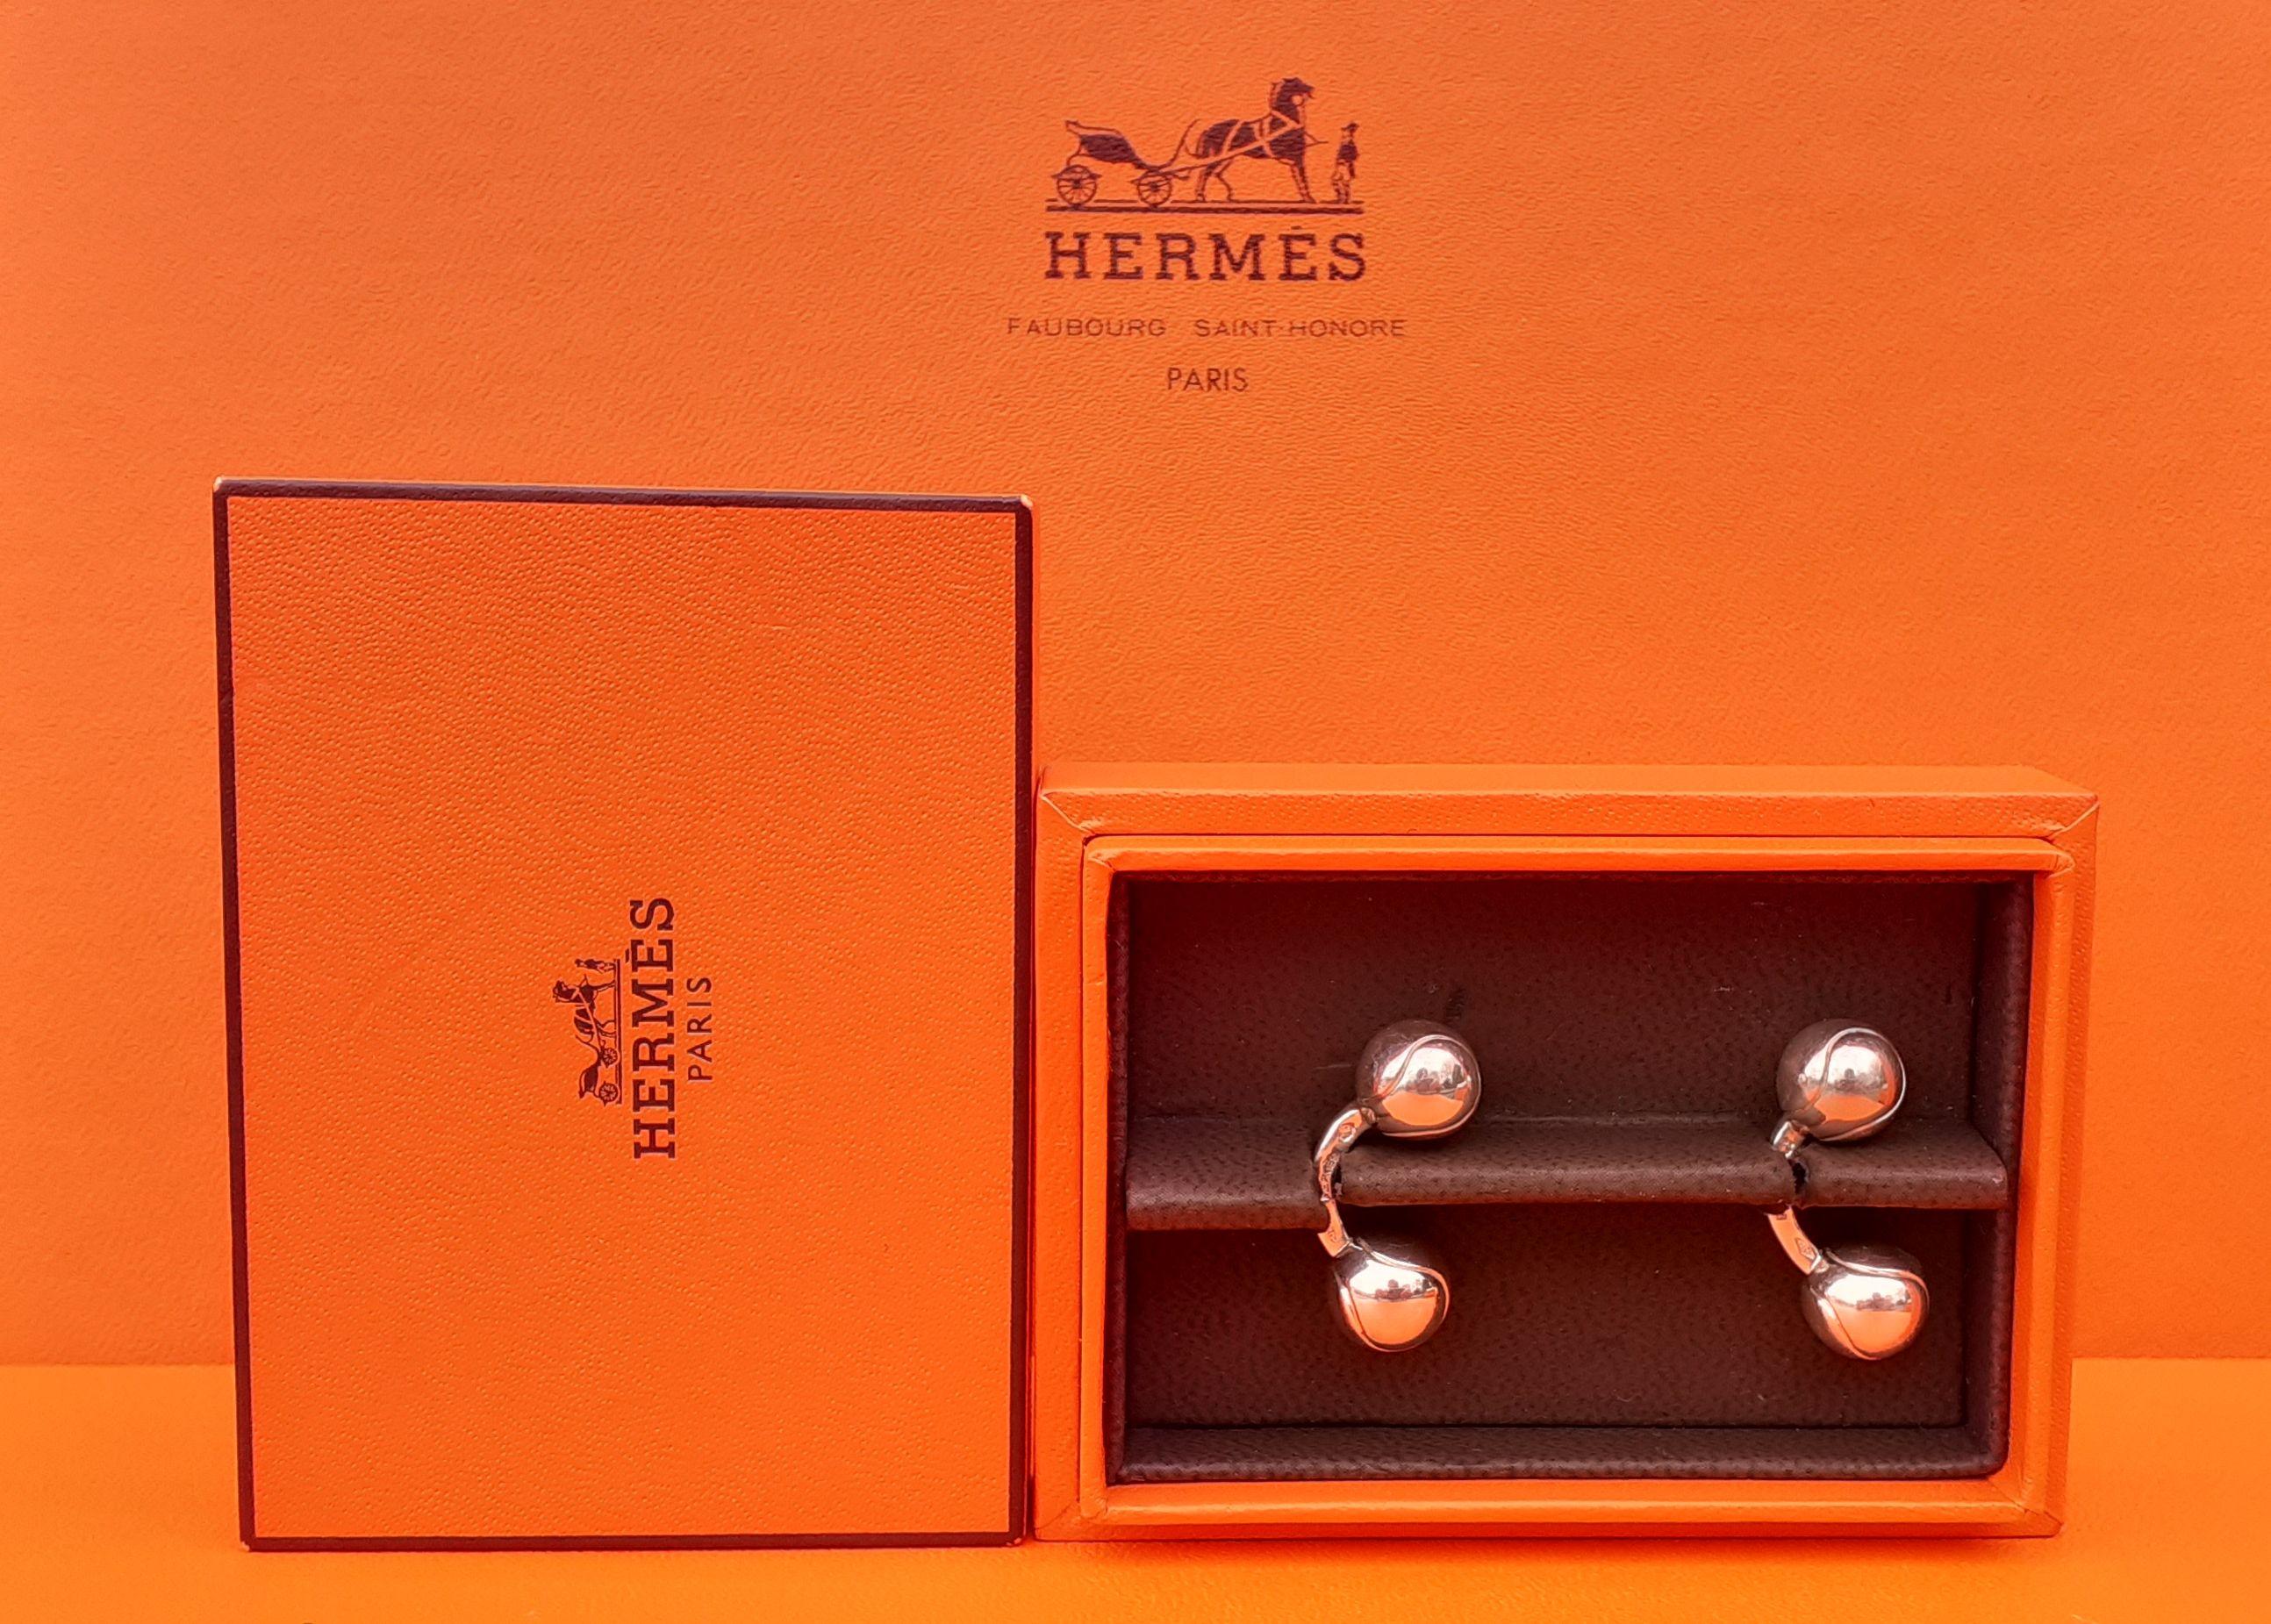 Rare Authentic Hermès Cufflinks

Tennis Balls Shaped

Made of Stering Silver (Ag925)

Colorway: Silver

